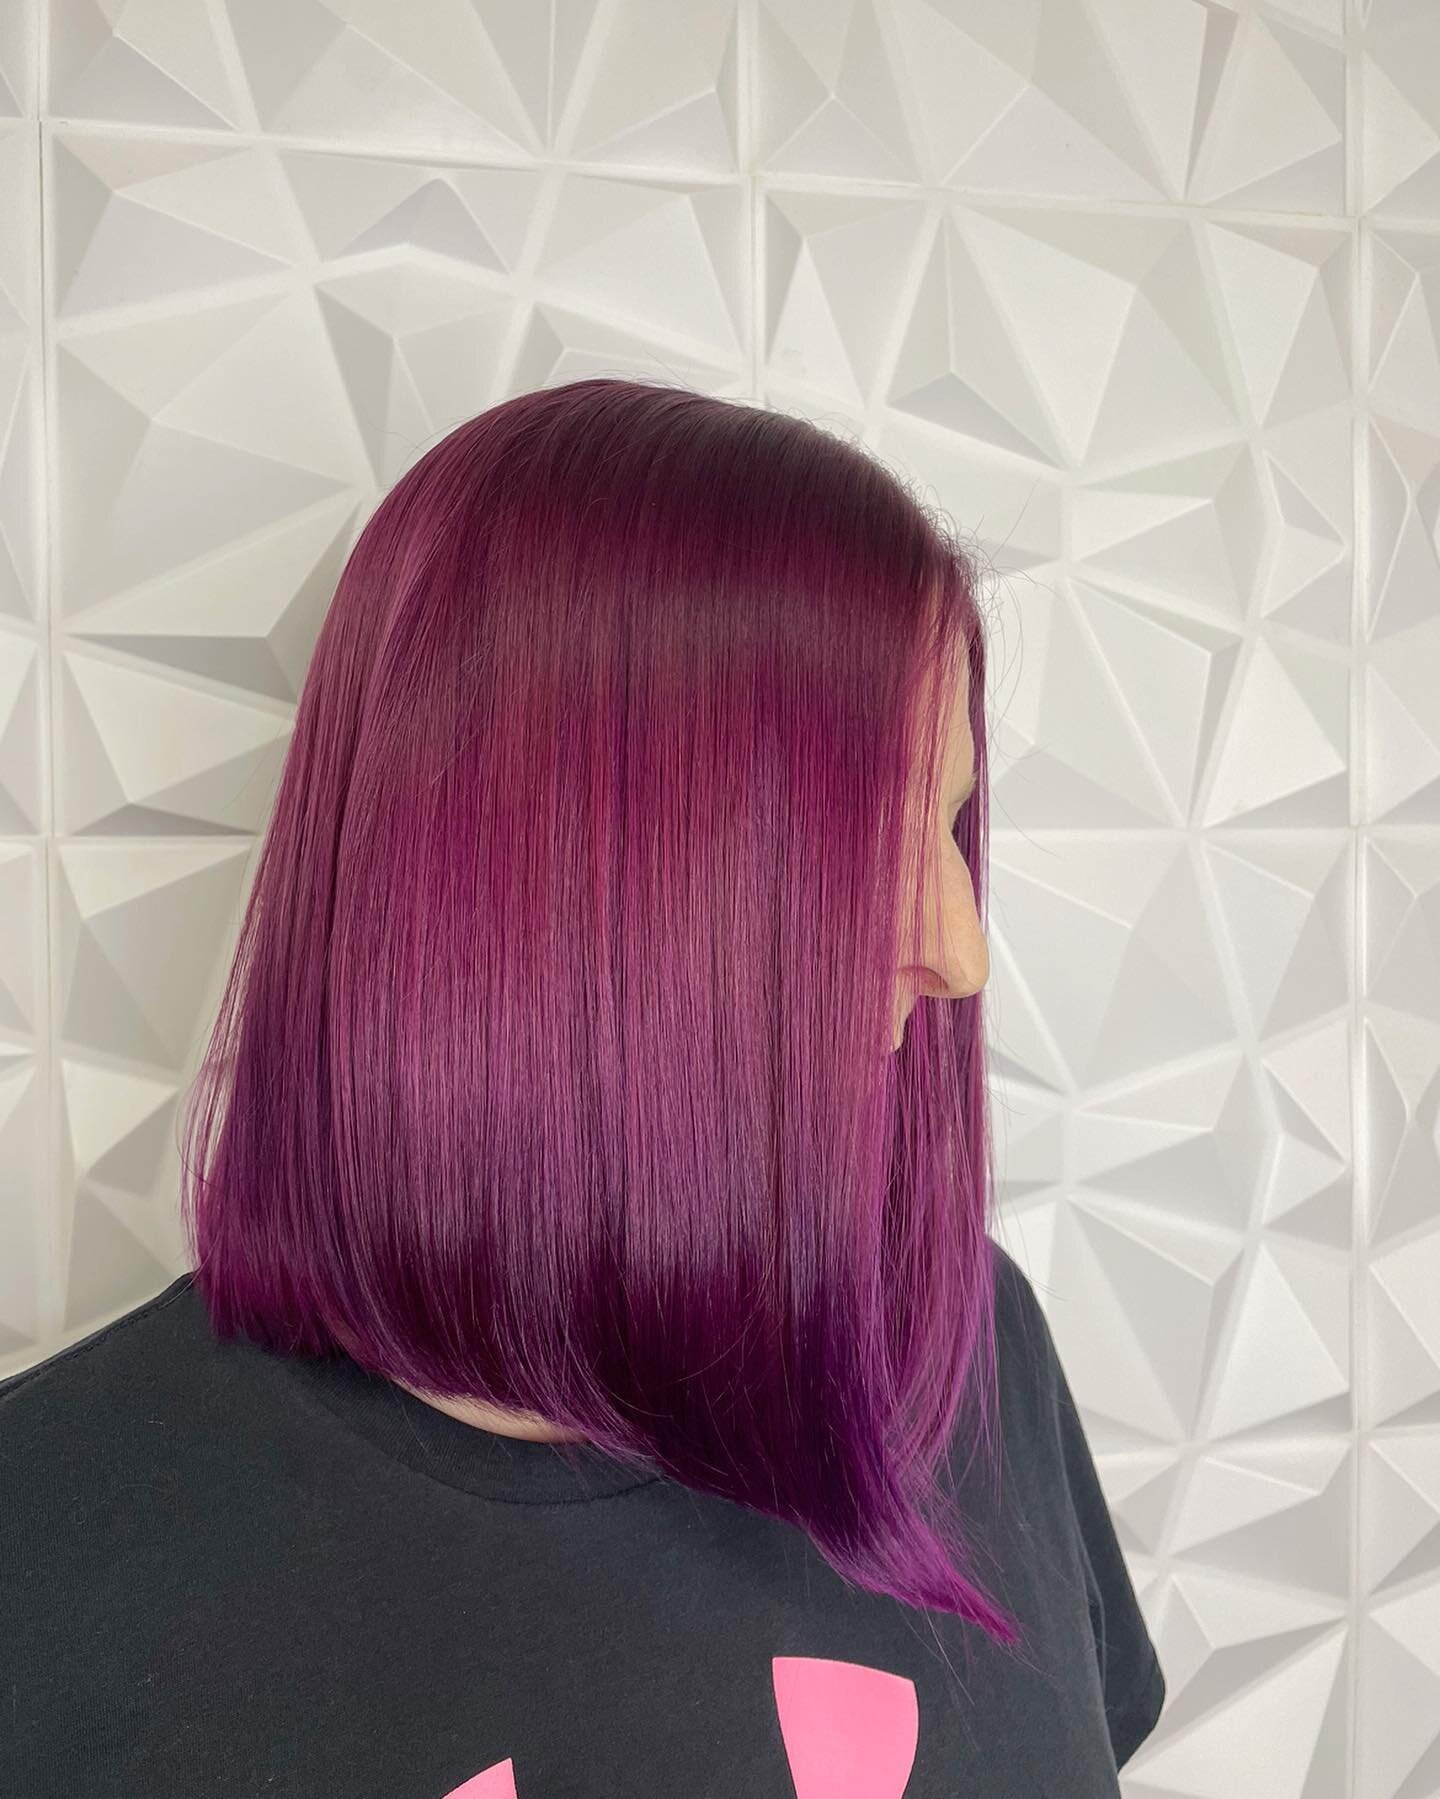 Fresh chop with a banging Mauve custom colour created by yours truly. 

Hope everyone is enjoying their long weekend 🧞&zwj;♀️Back in the salon Tuesday :)